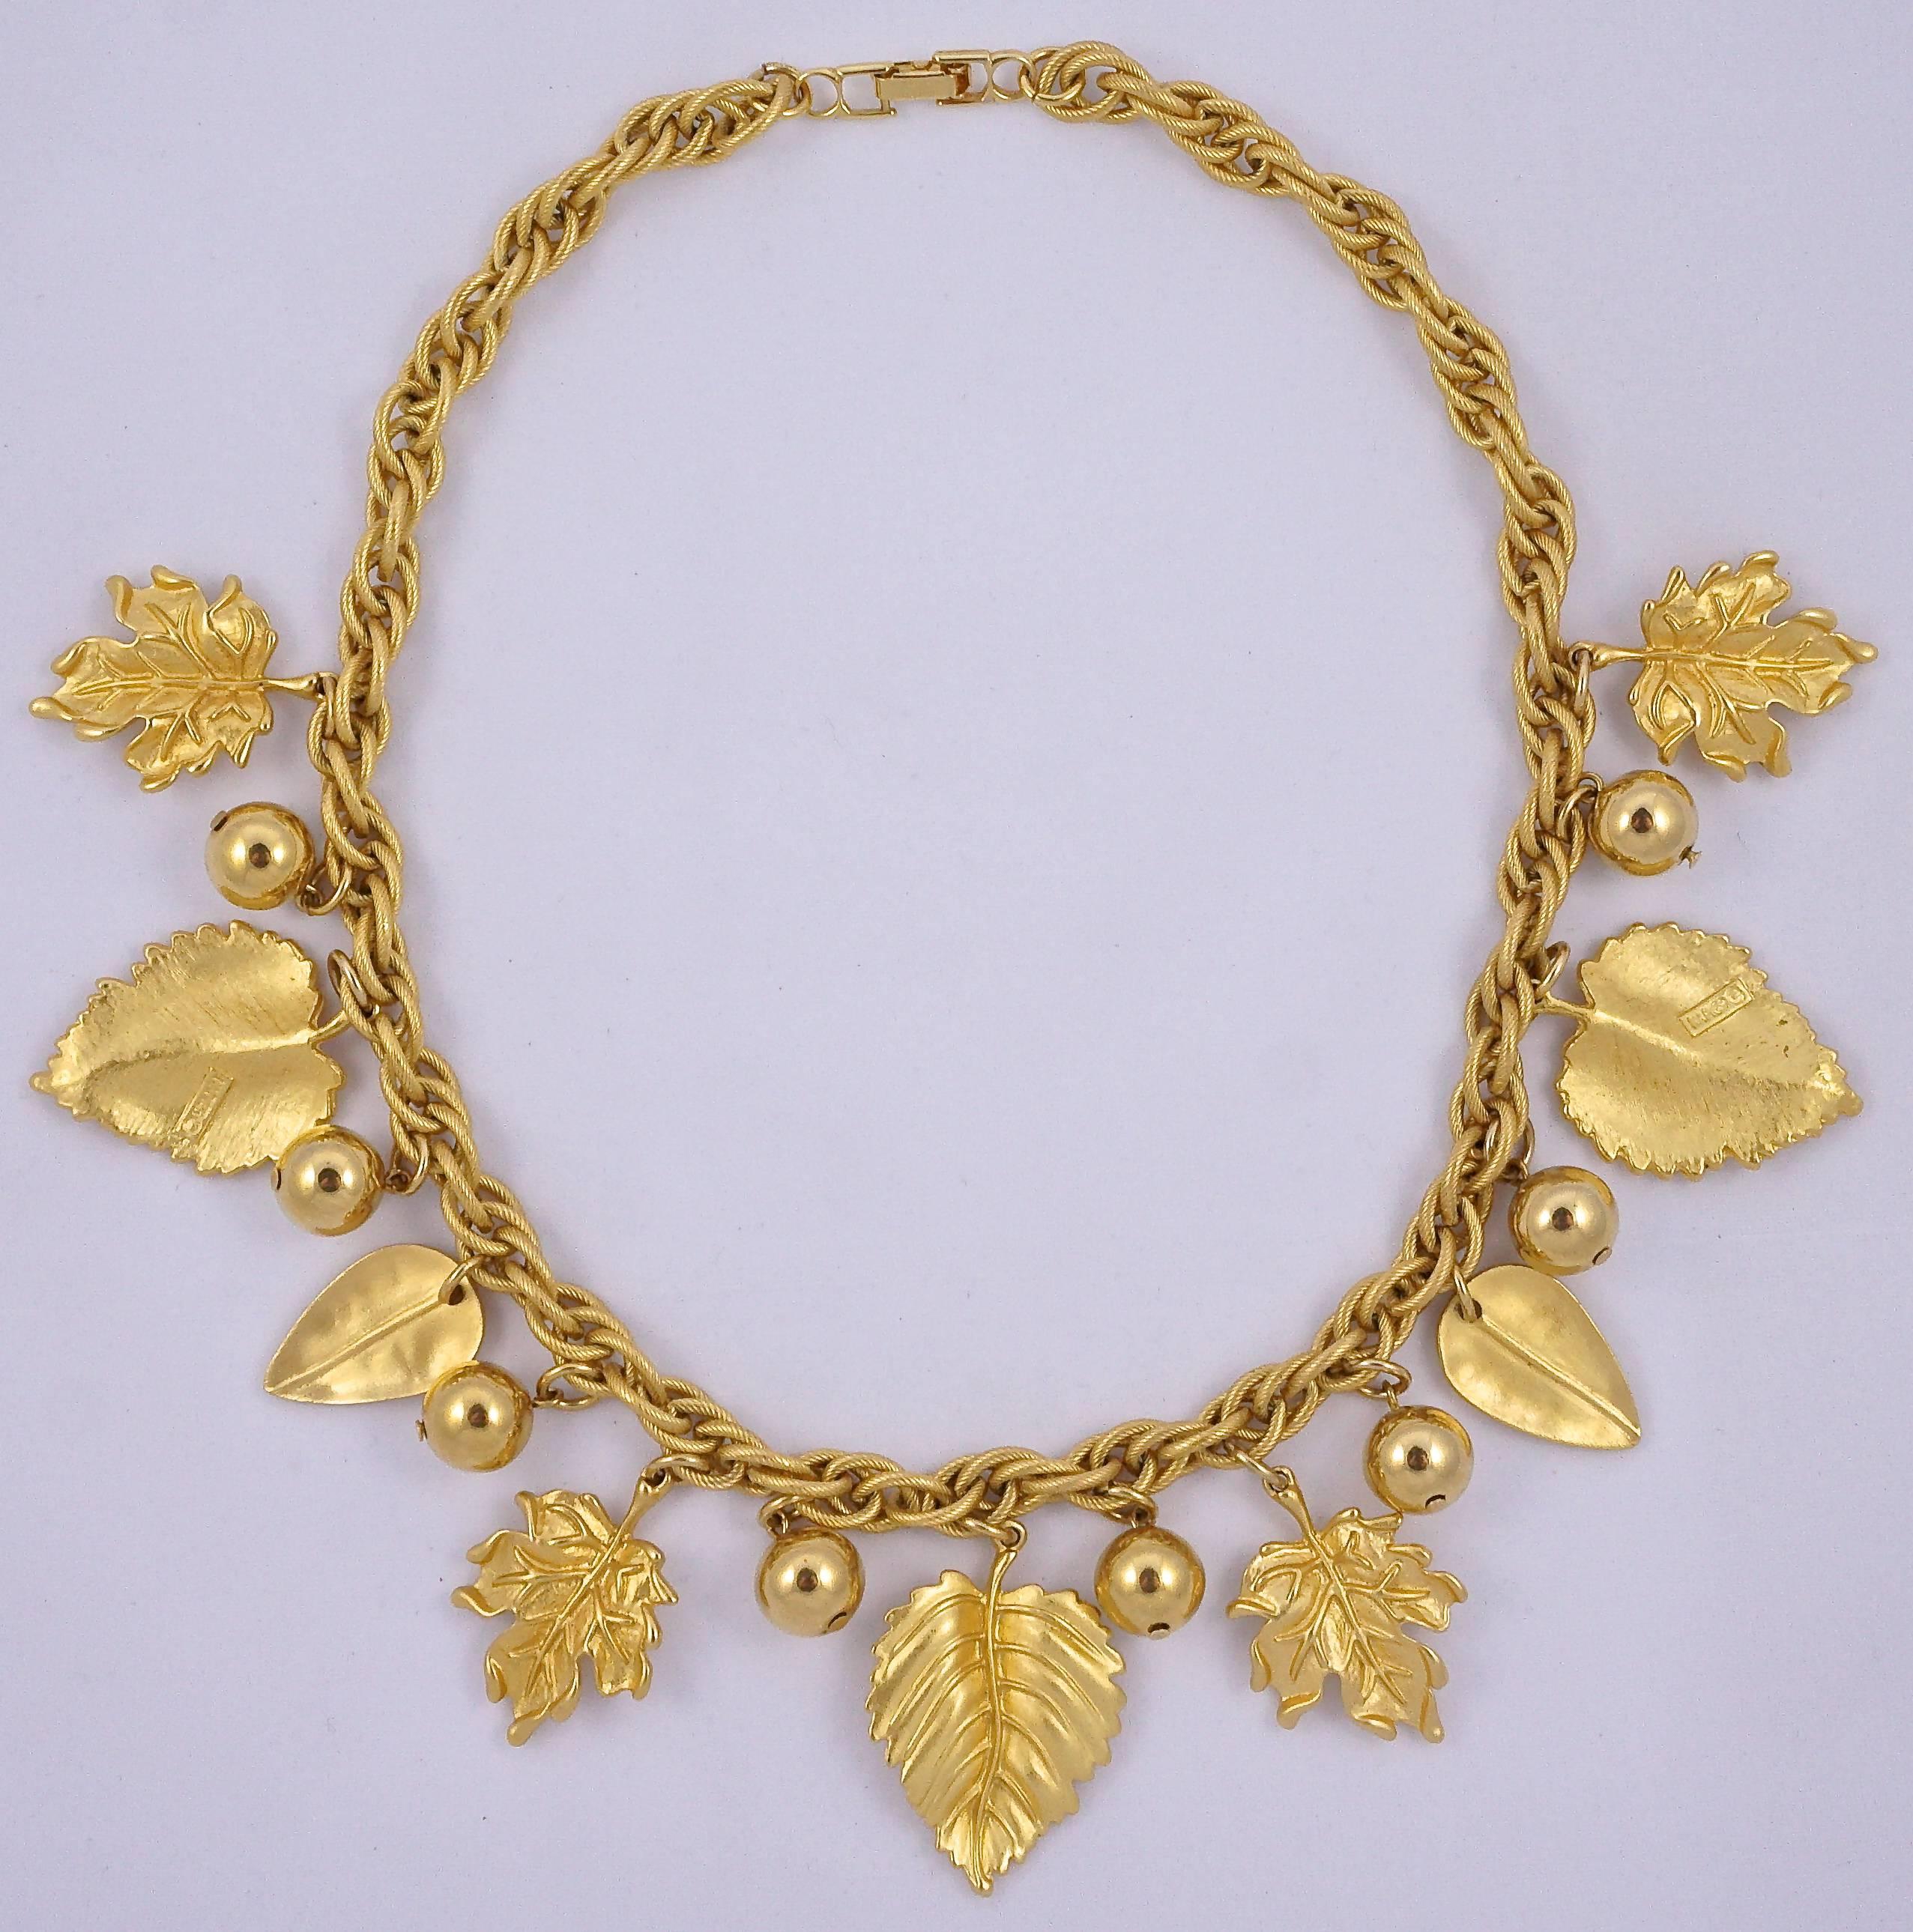 Fabulous Napier gold plated necklace with a fancy link rope design. Dropping from the necklace are shiny balls and matt textured leaves. The clasp is stamped, and so are the larger leaves. Length 46cm, 18 inches, and the large leaves are 3.2cm, 1.2